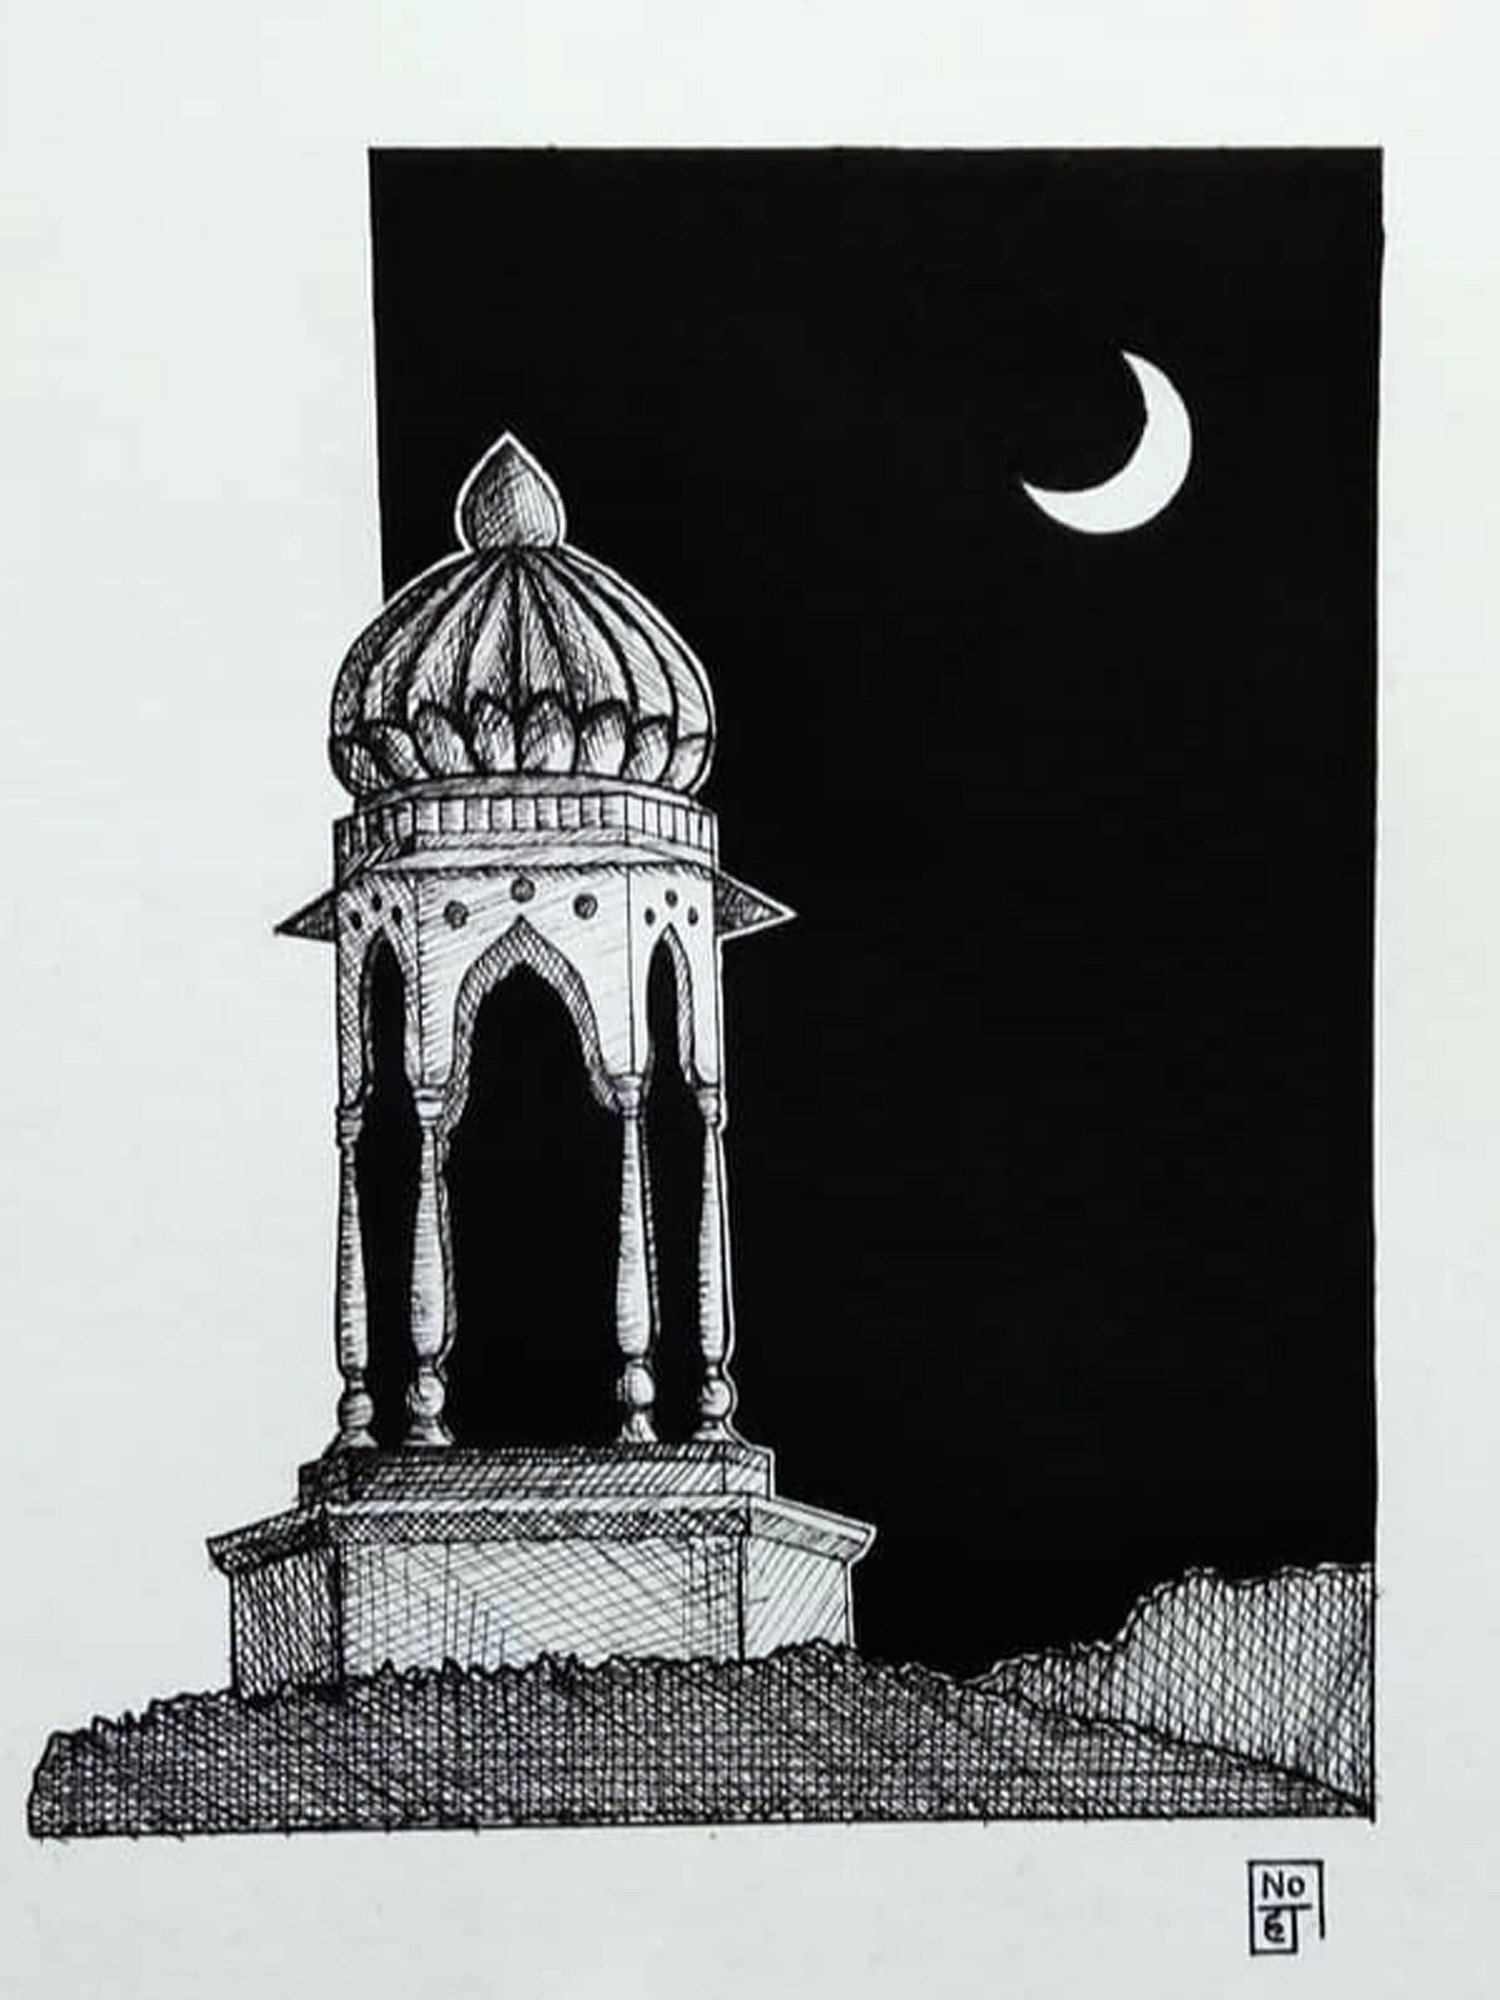 Mosque sketch Cut Out Stock Images  Pictures  Alamy